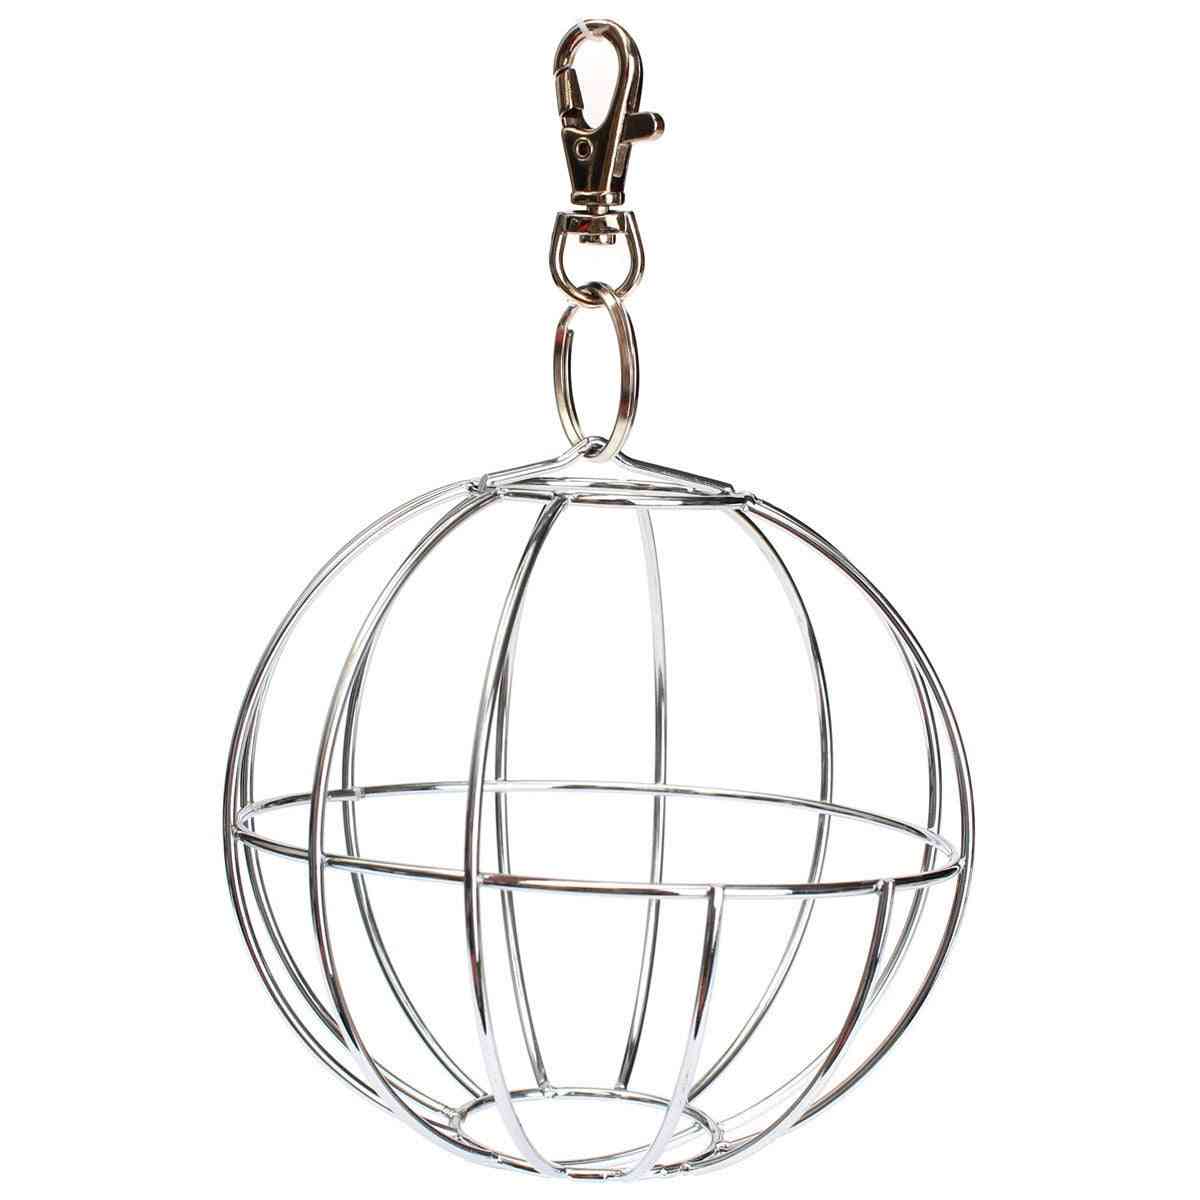 Round Sphere Food Feed Dispenser Hanging Ball